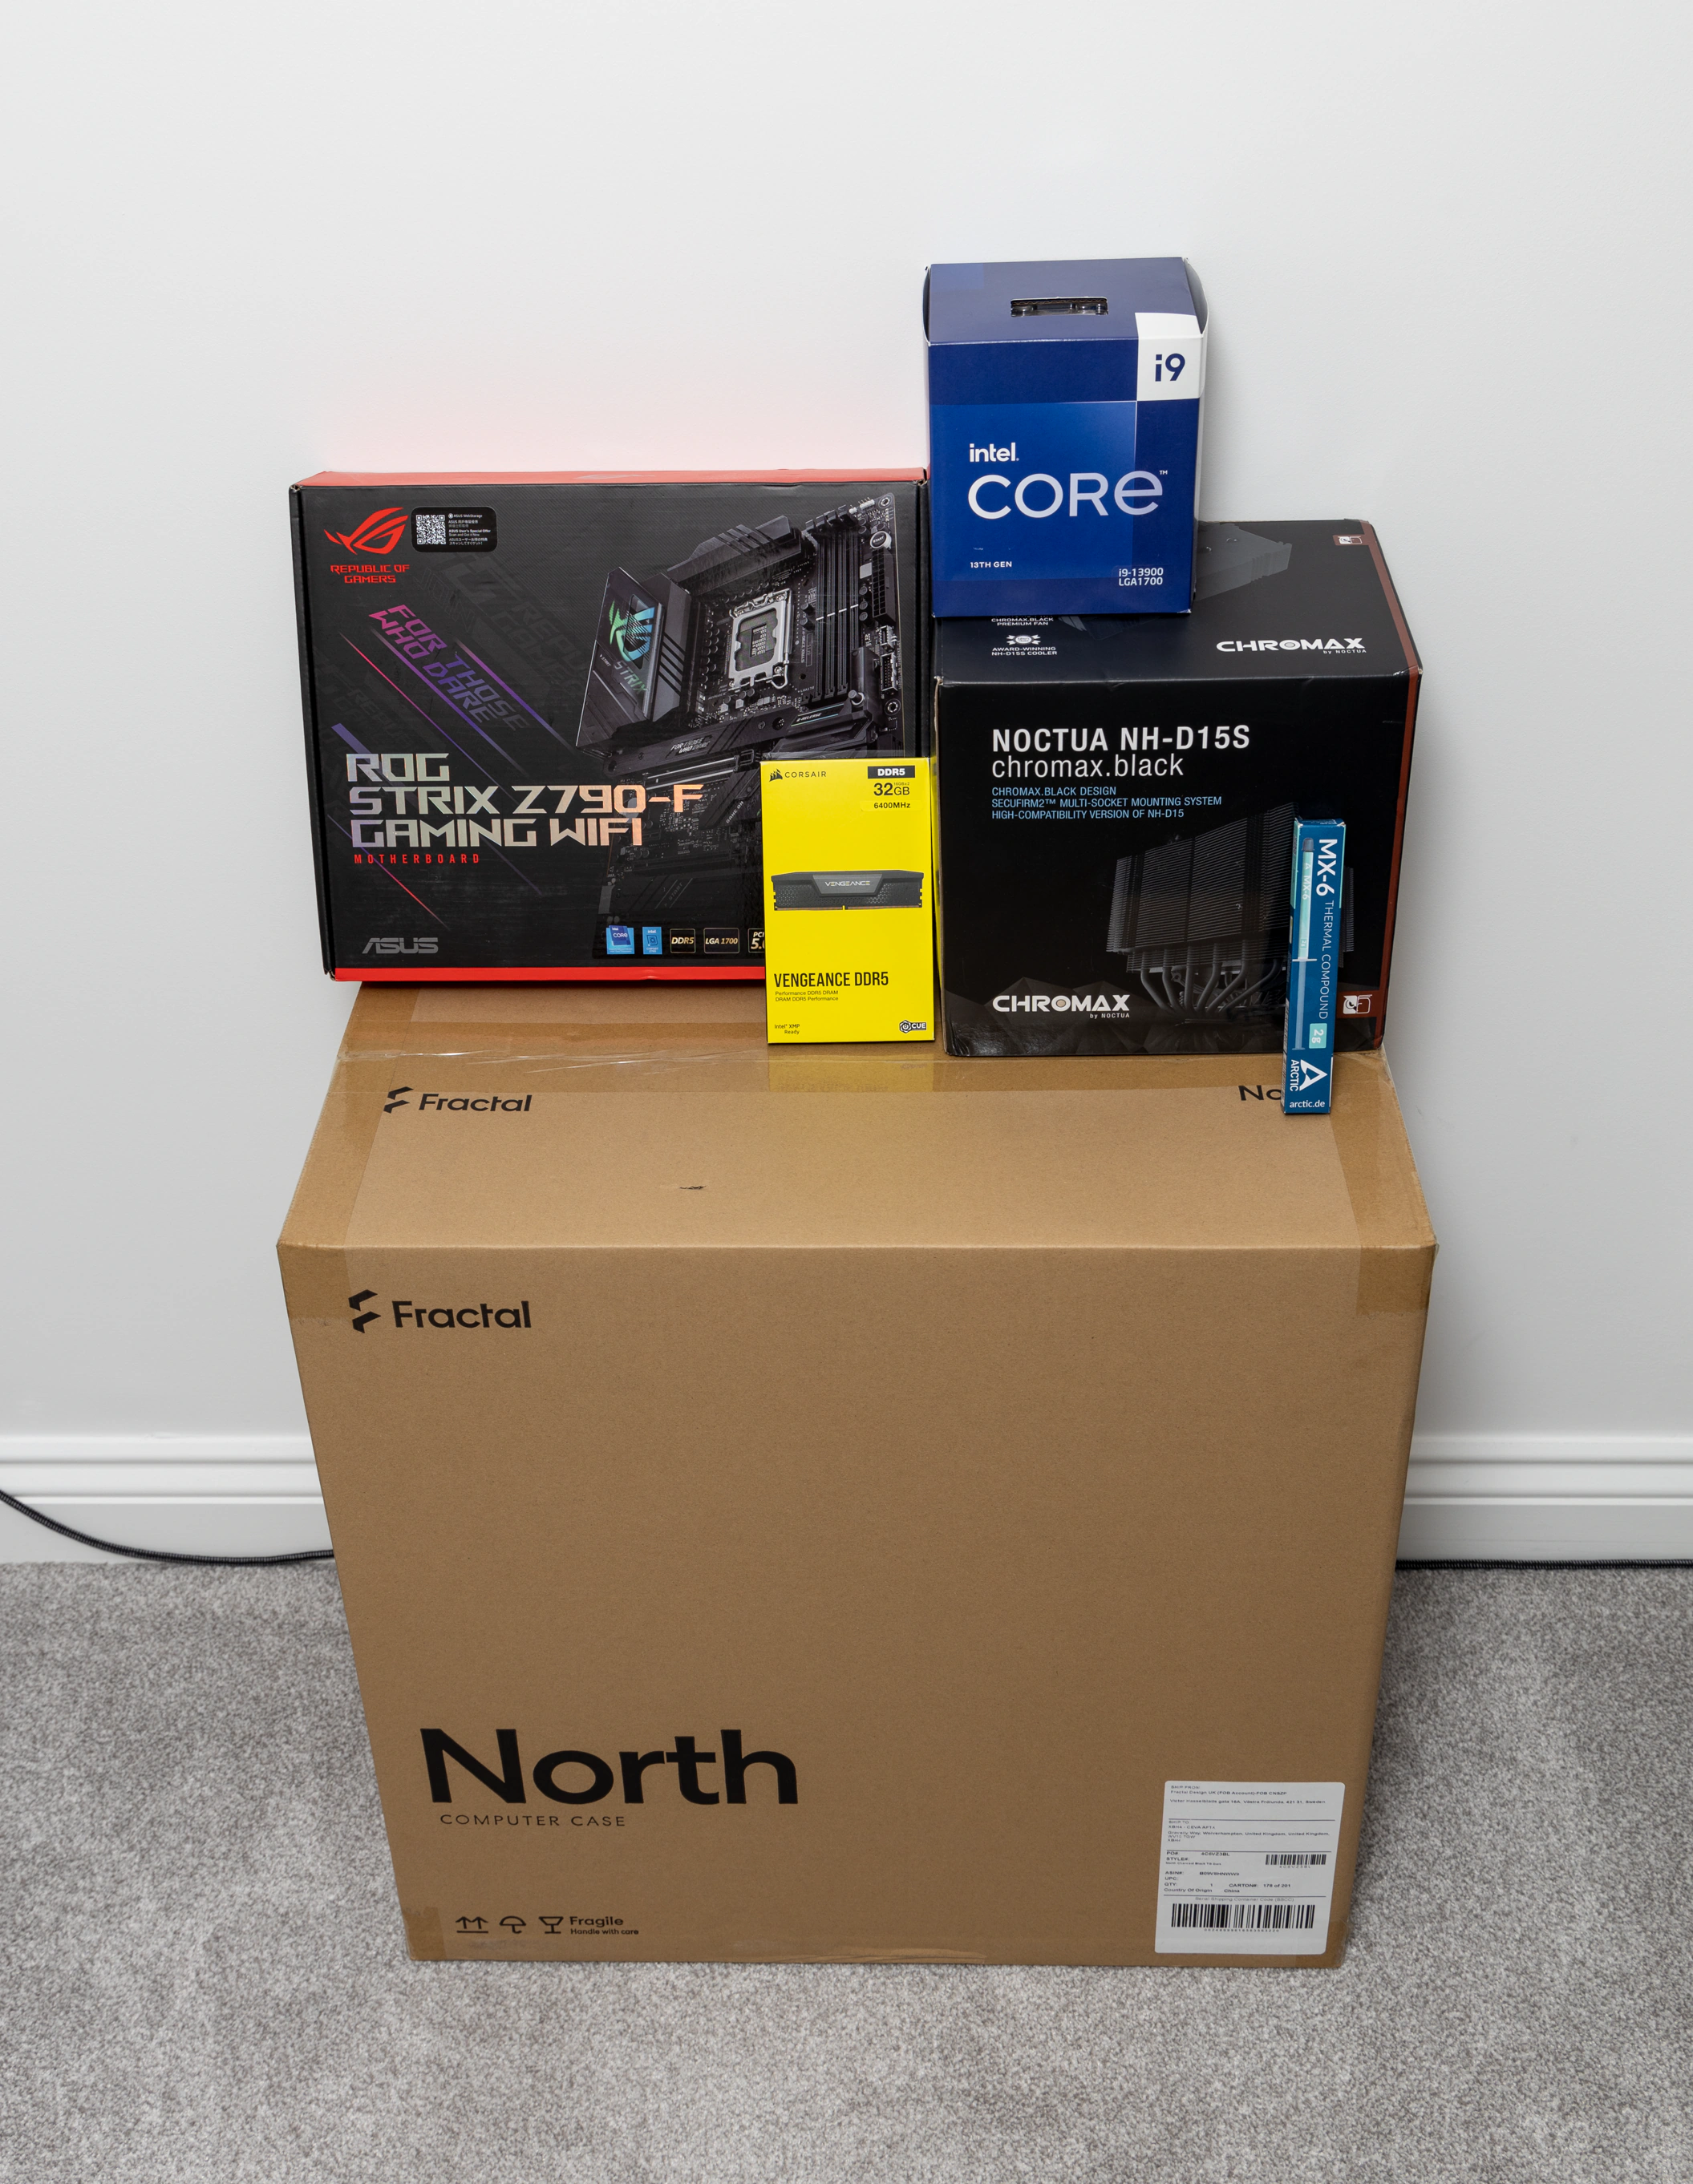 All the new computer parts sealed in their boxes.